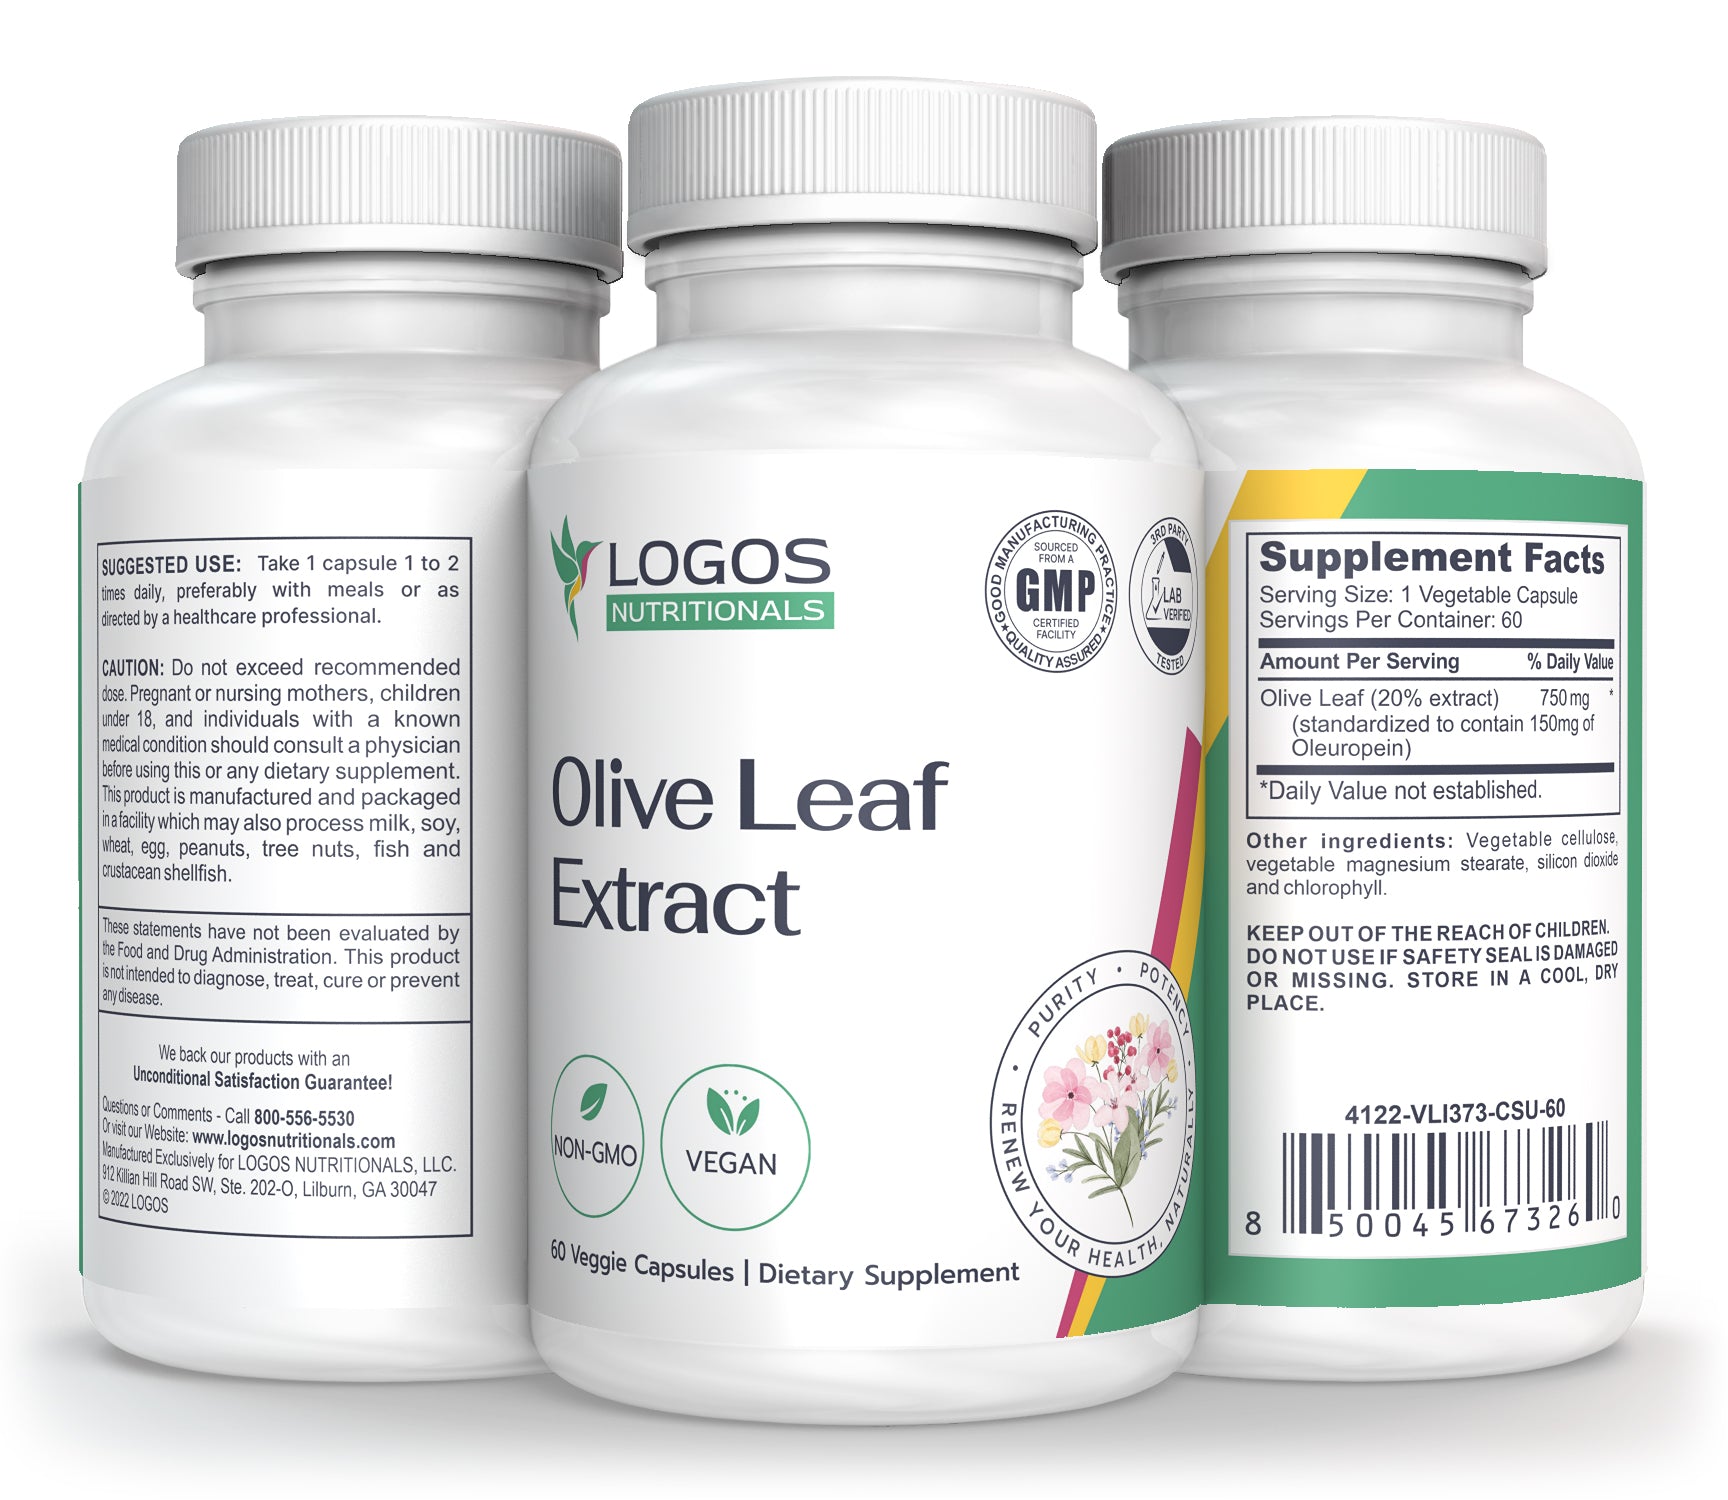 Logos Nutritionals_Olive Leaf Extract